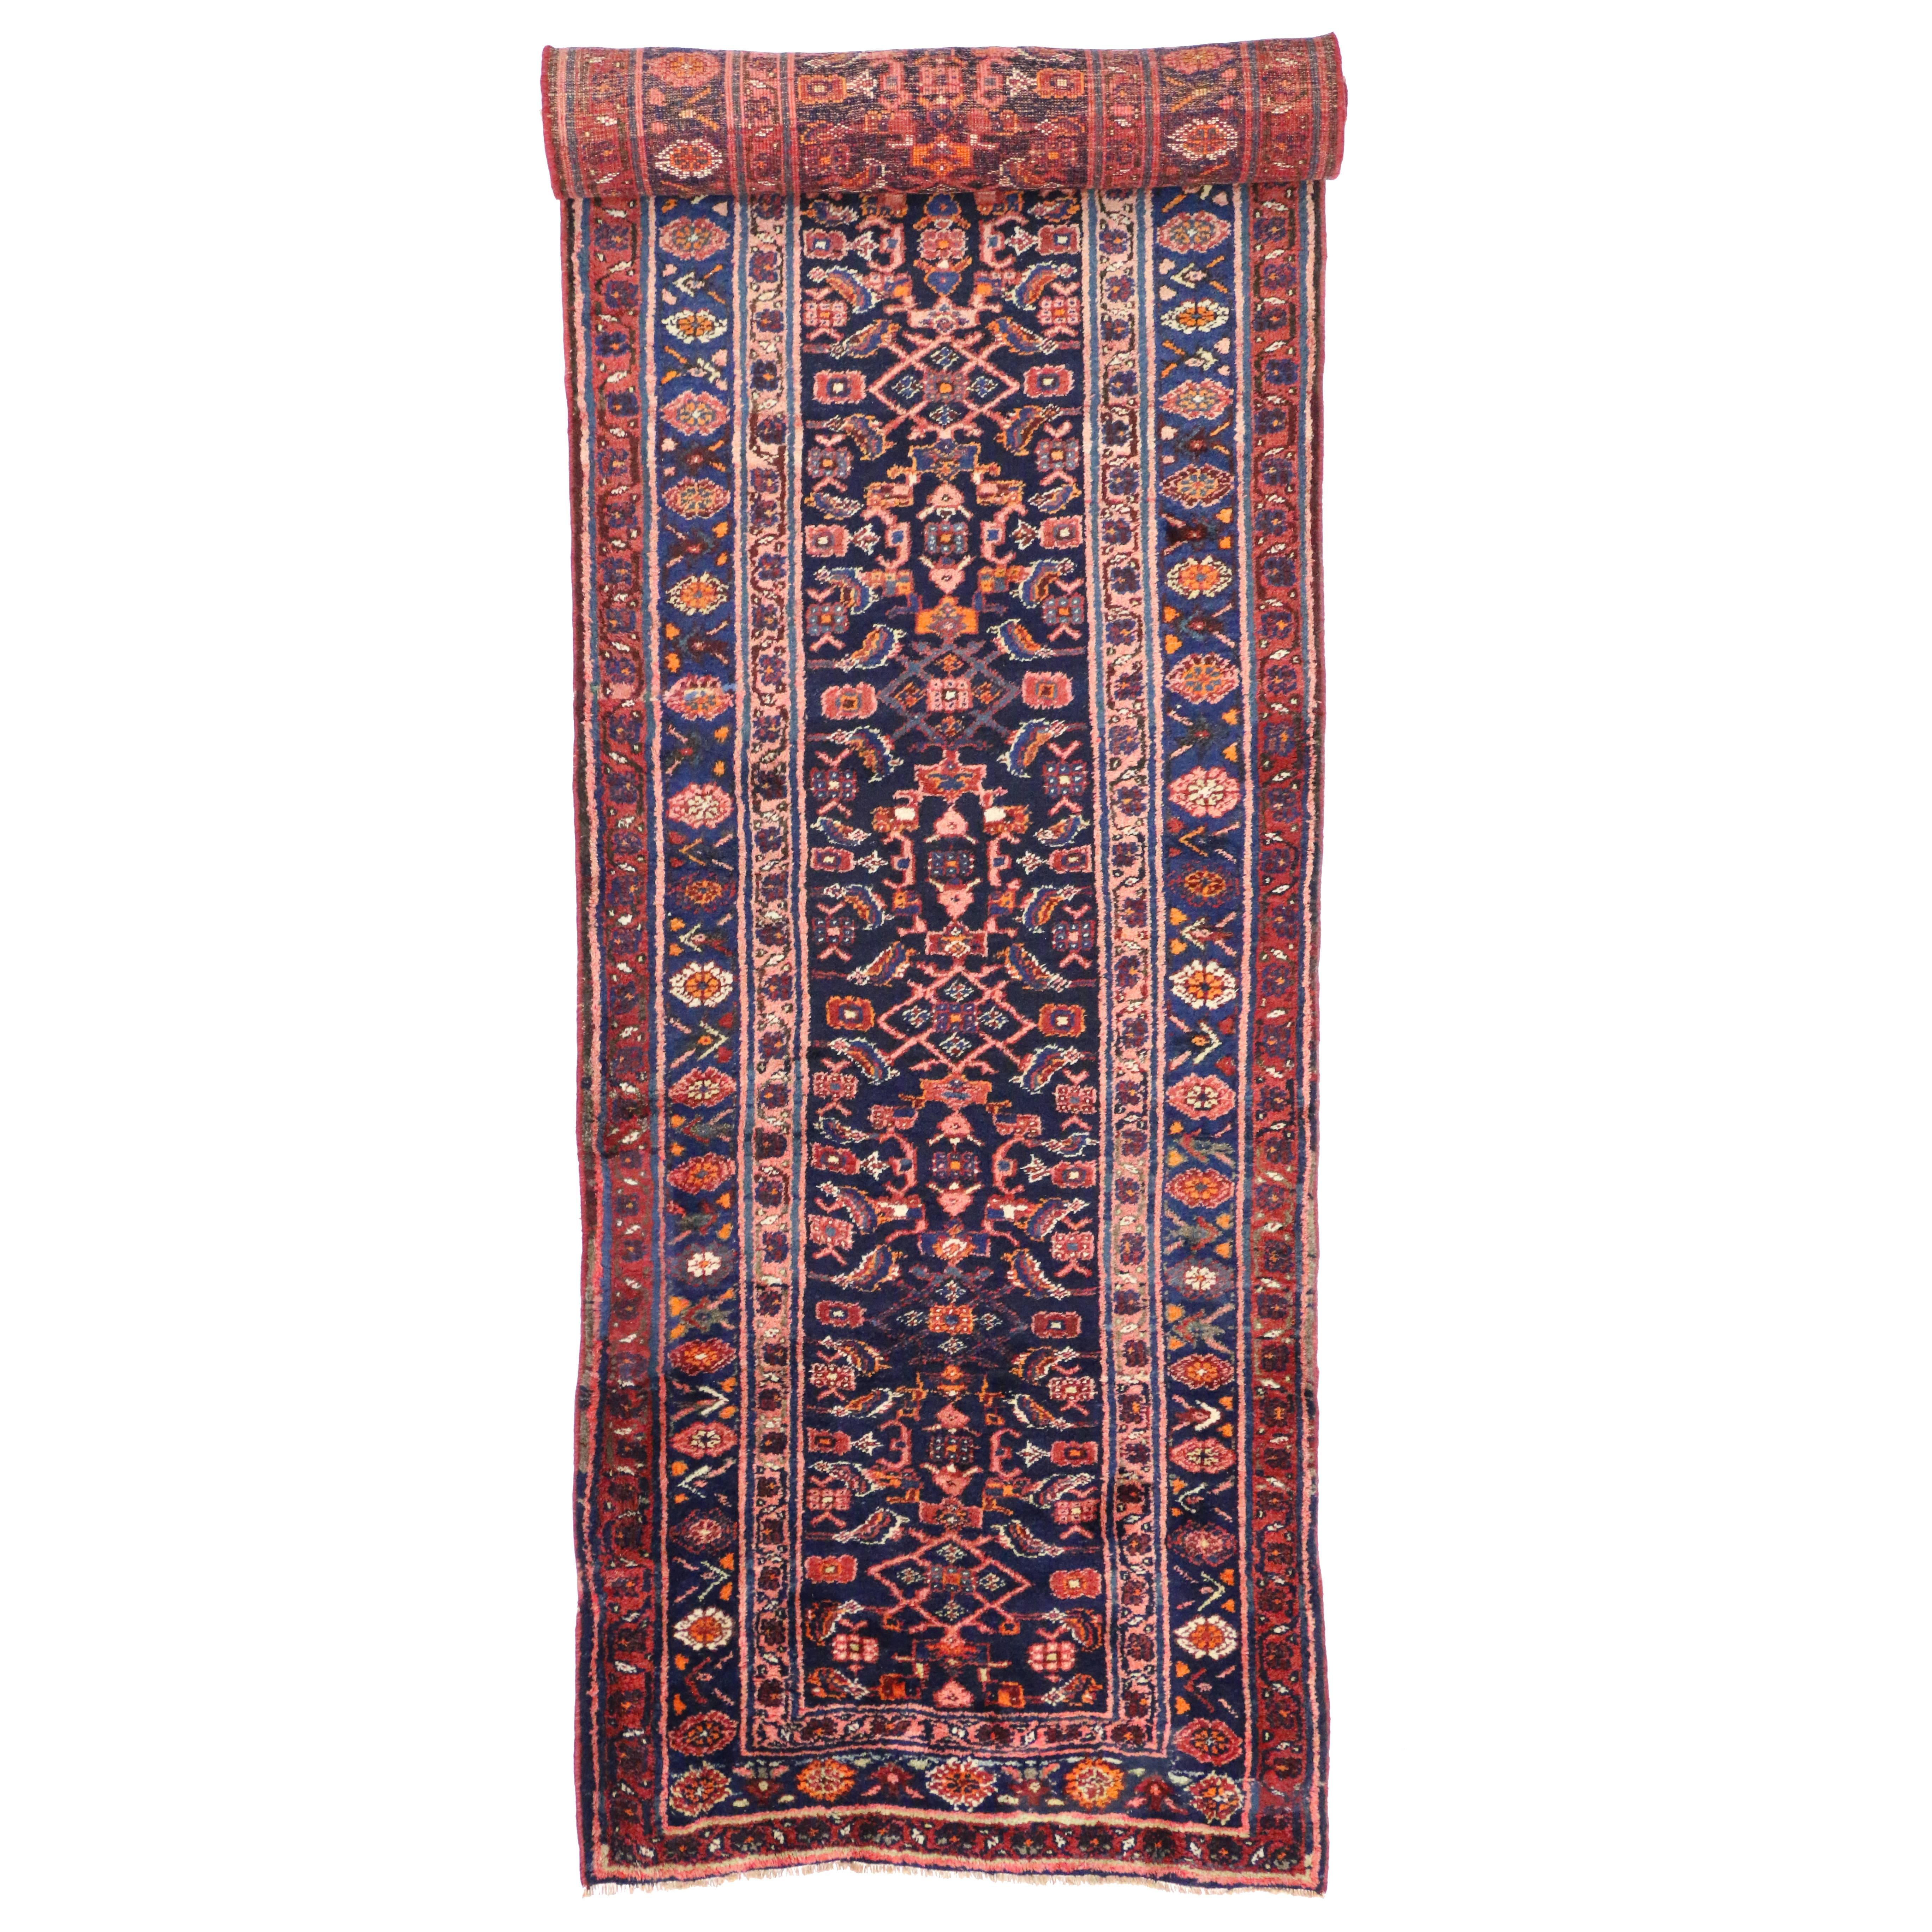 Late 19th-Century Antique Persian Kurd Runner with Modern Victorian Style